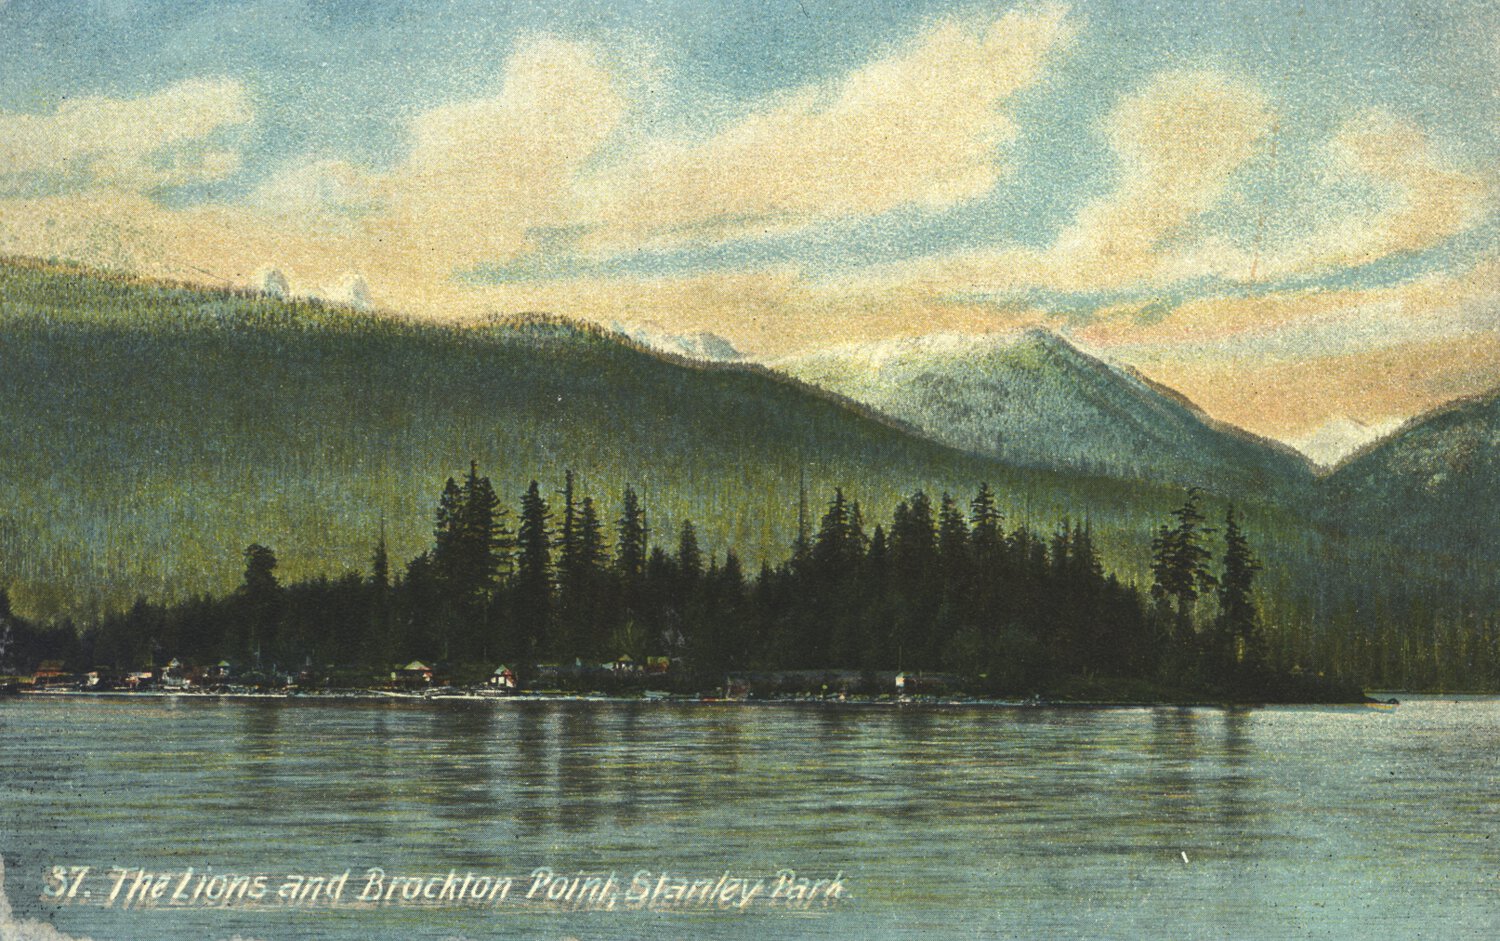 Small body of water with evergreen trees, green hills, and snow-capped mountains in distance.